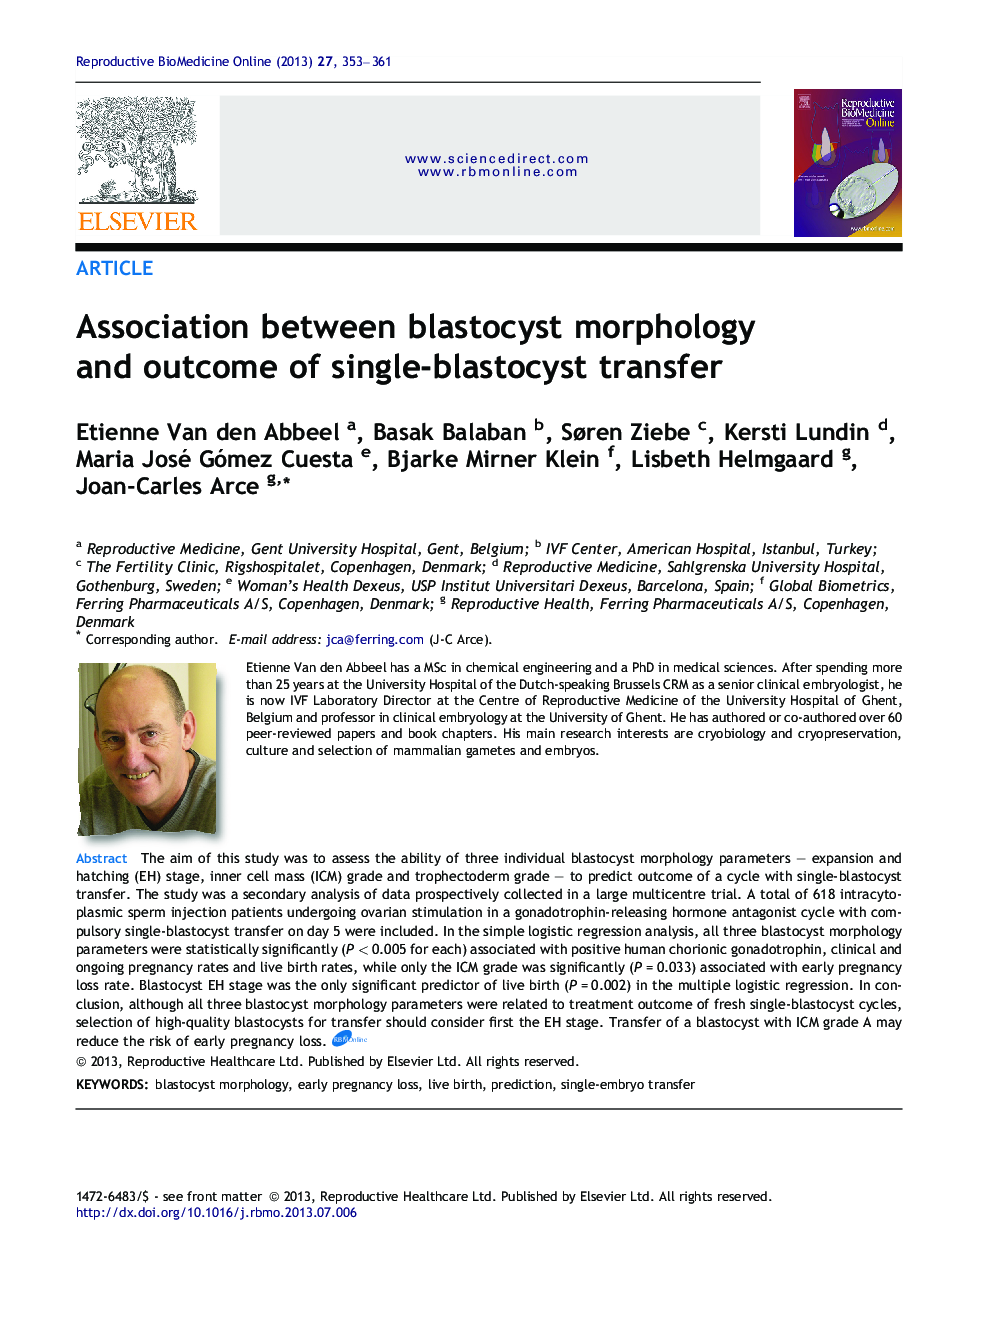 Association between blastocyst morphology and outcome of single-blastocyst transfer 